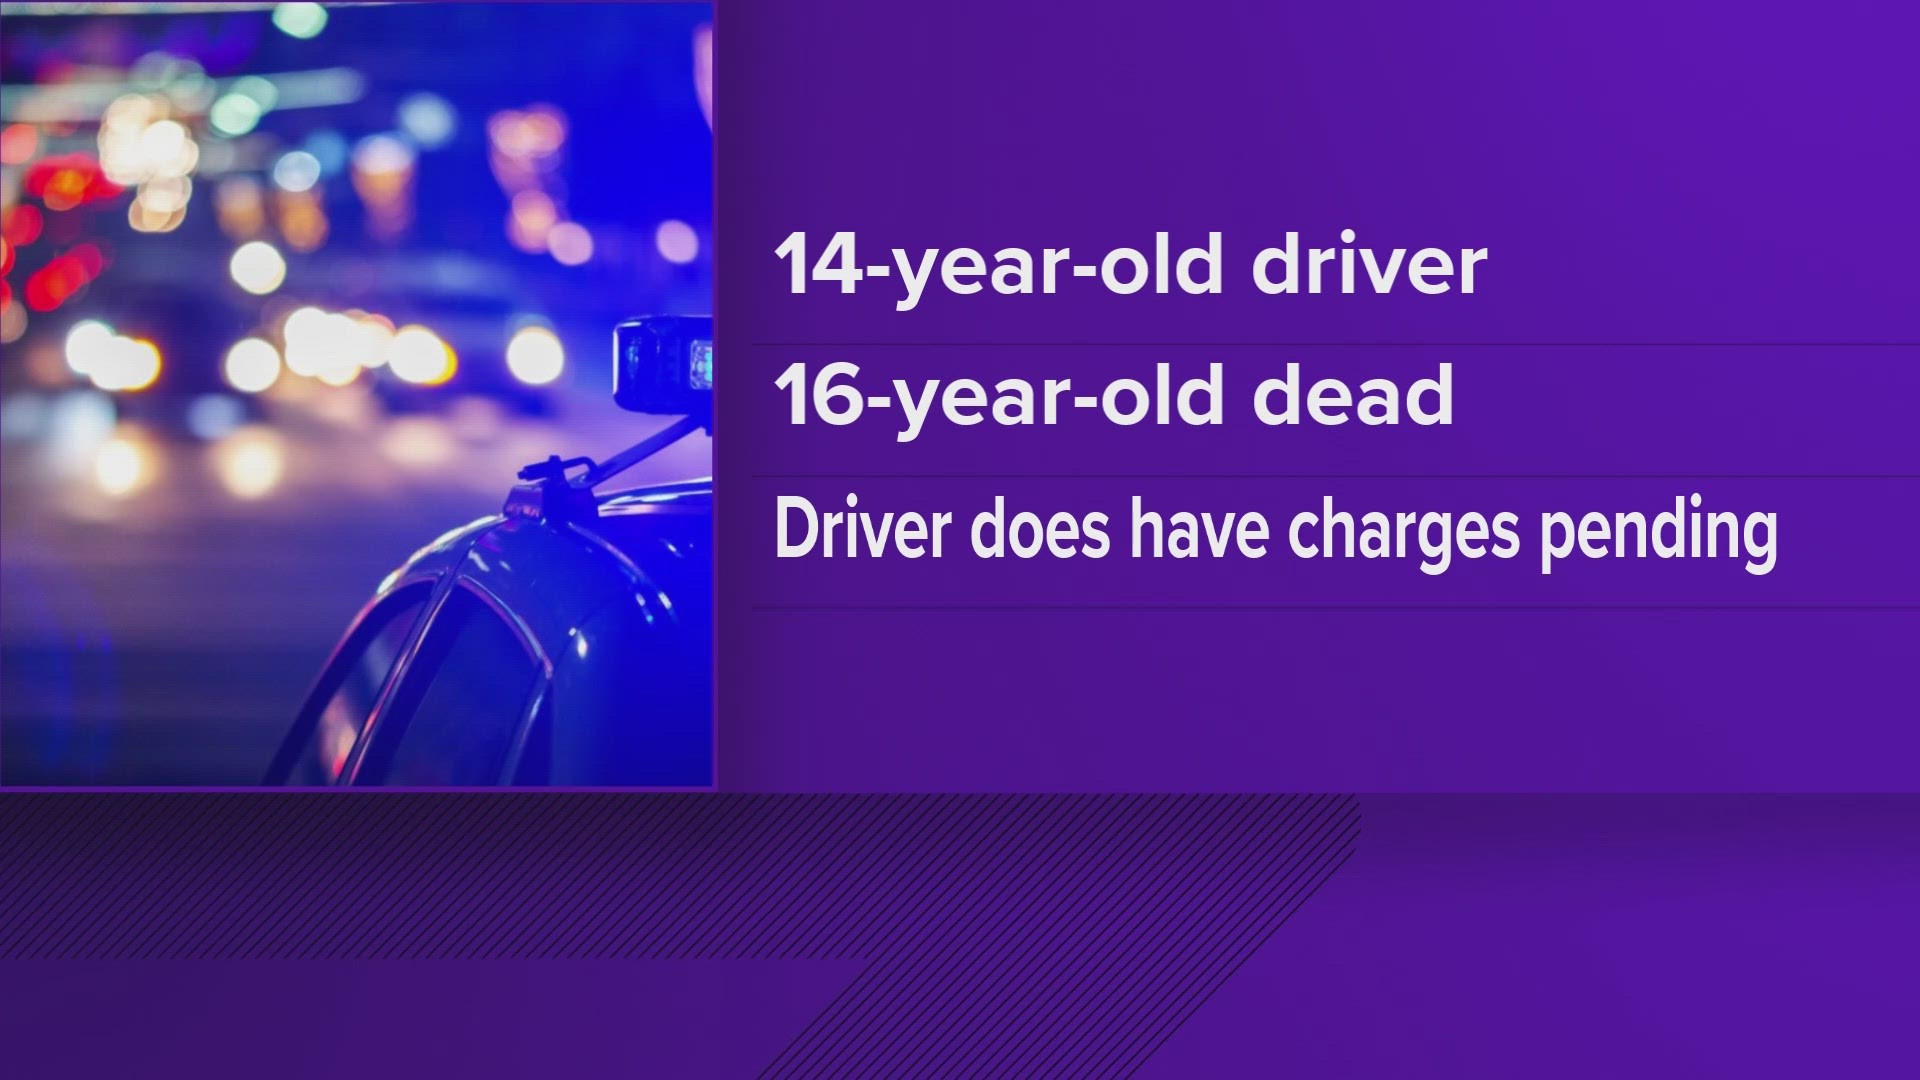 The Tennessee Highway Patrol said a 14-year-old was driving a car and lost control of the vehicle as it approached an intersection.